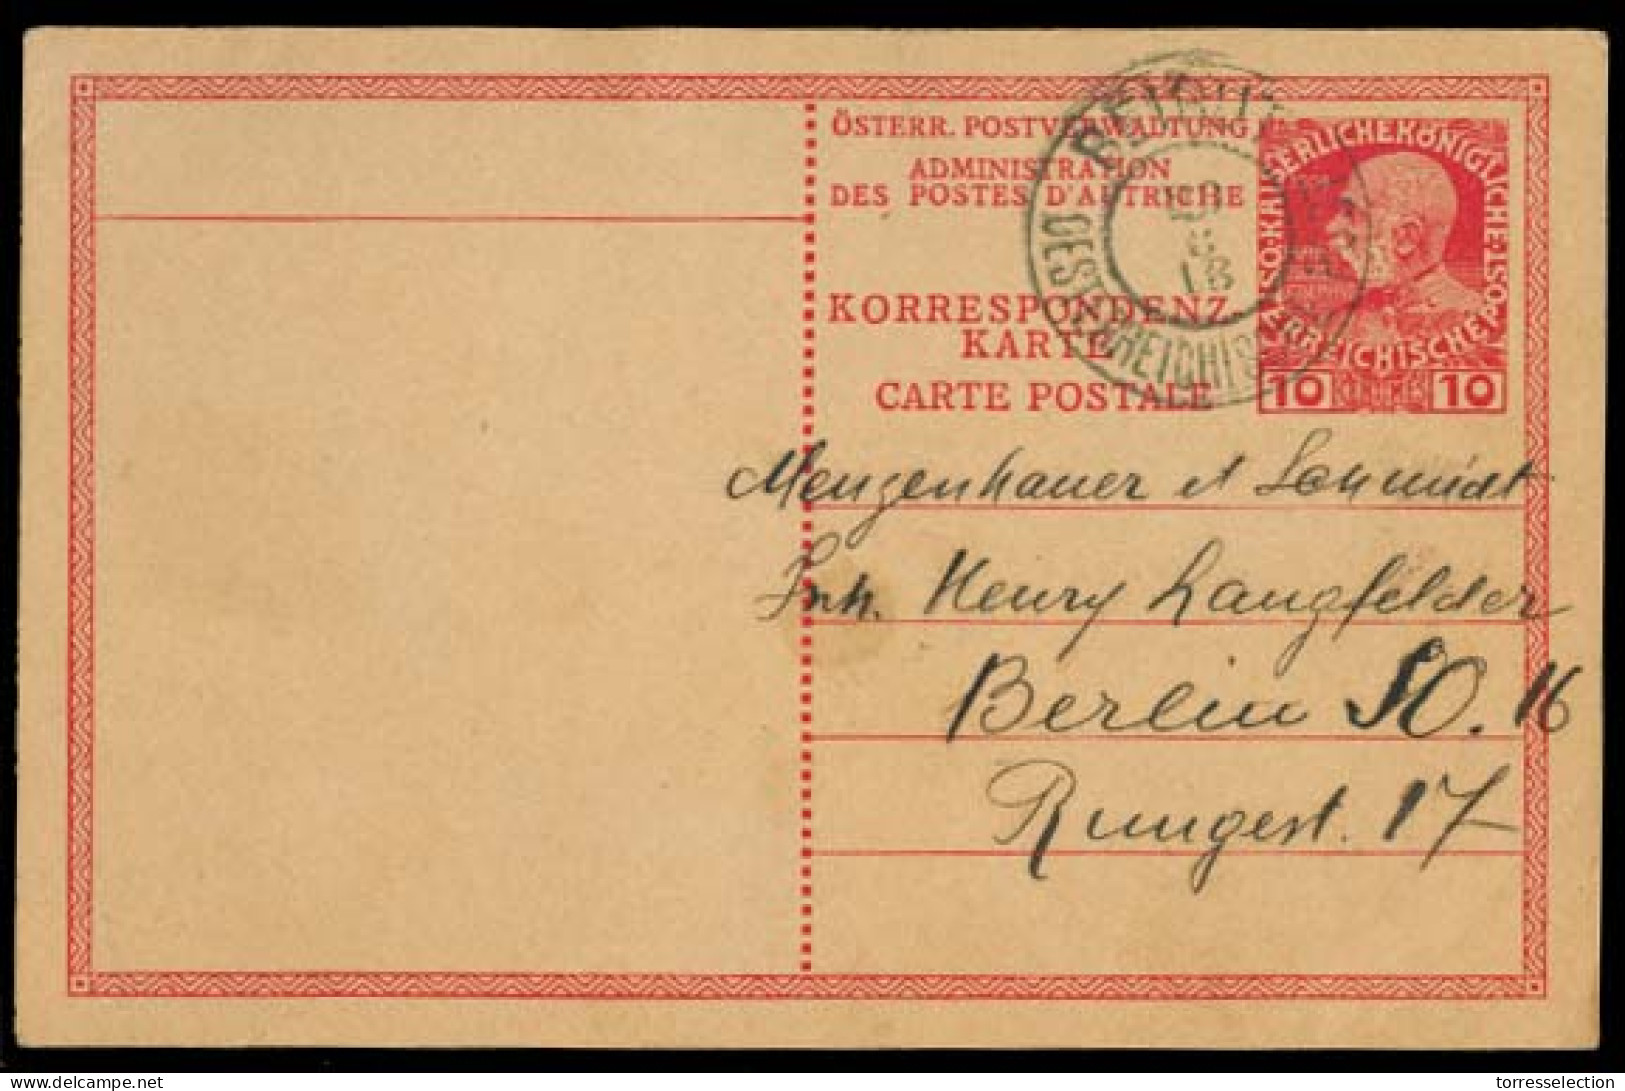 LEBANON. 1913 (28 Aug). Austrian Levant. PD Beirut - Germany 10c Red Stat Card. Fine Used. - Liban